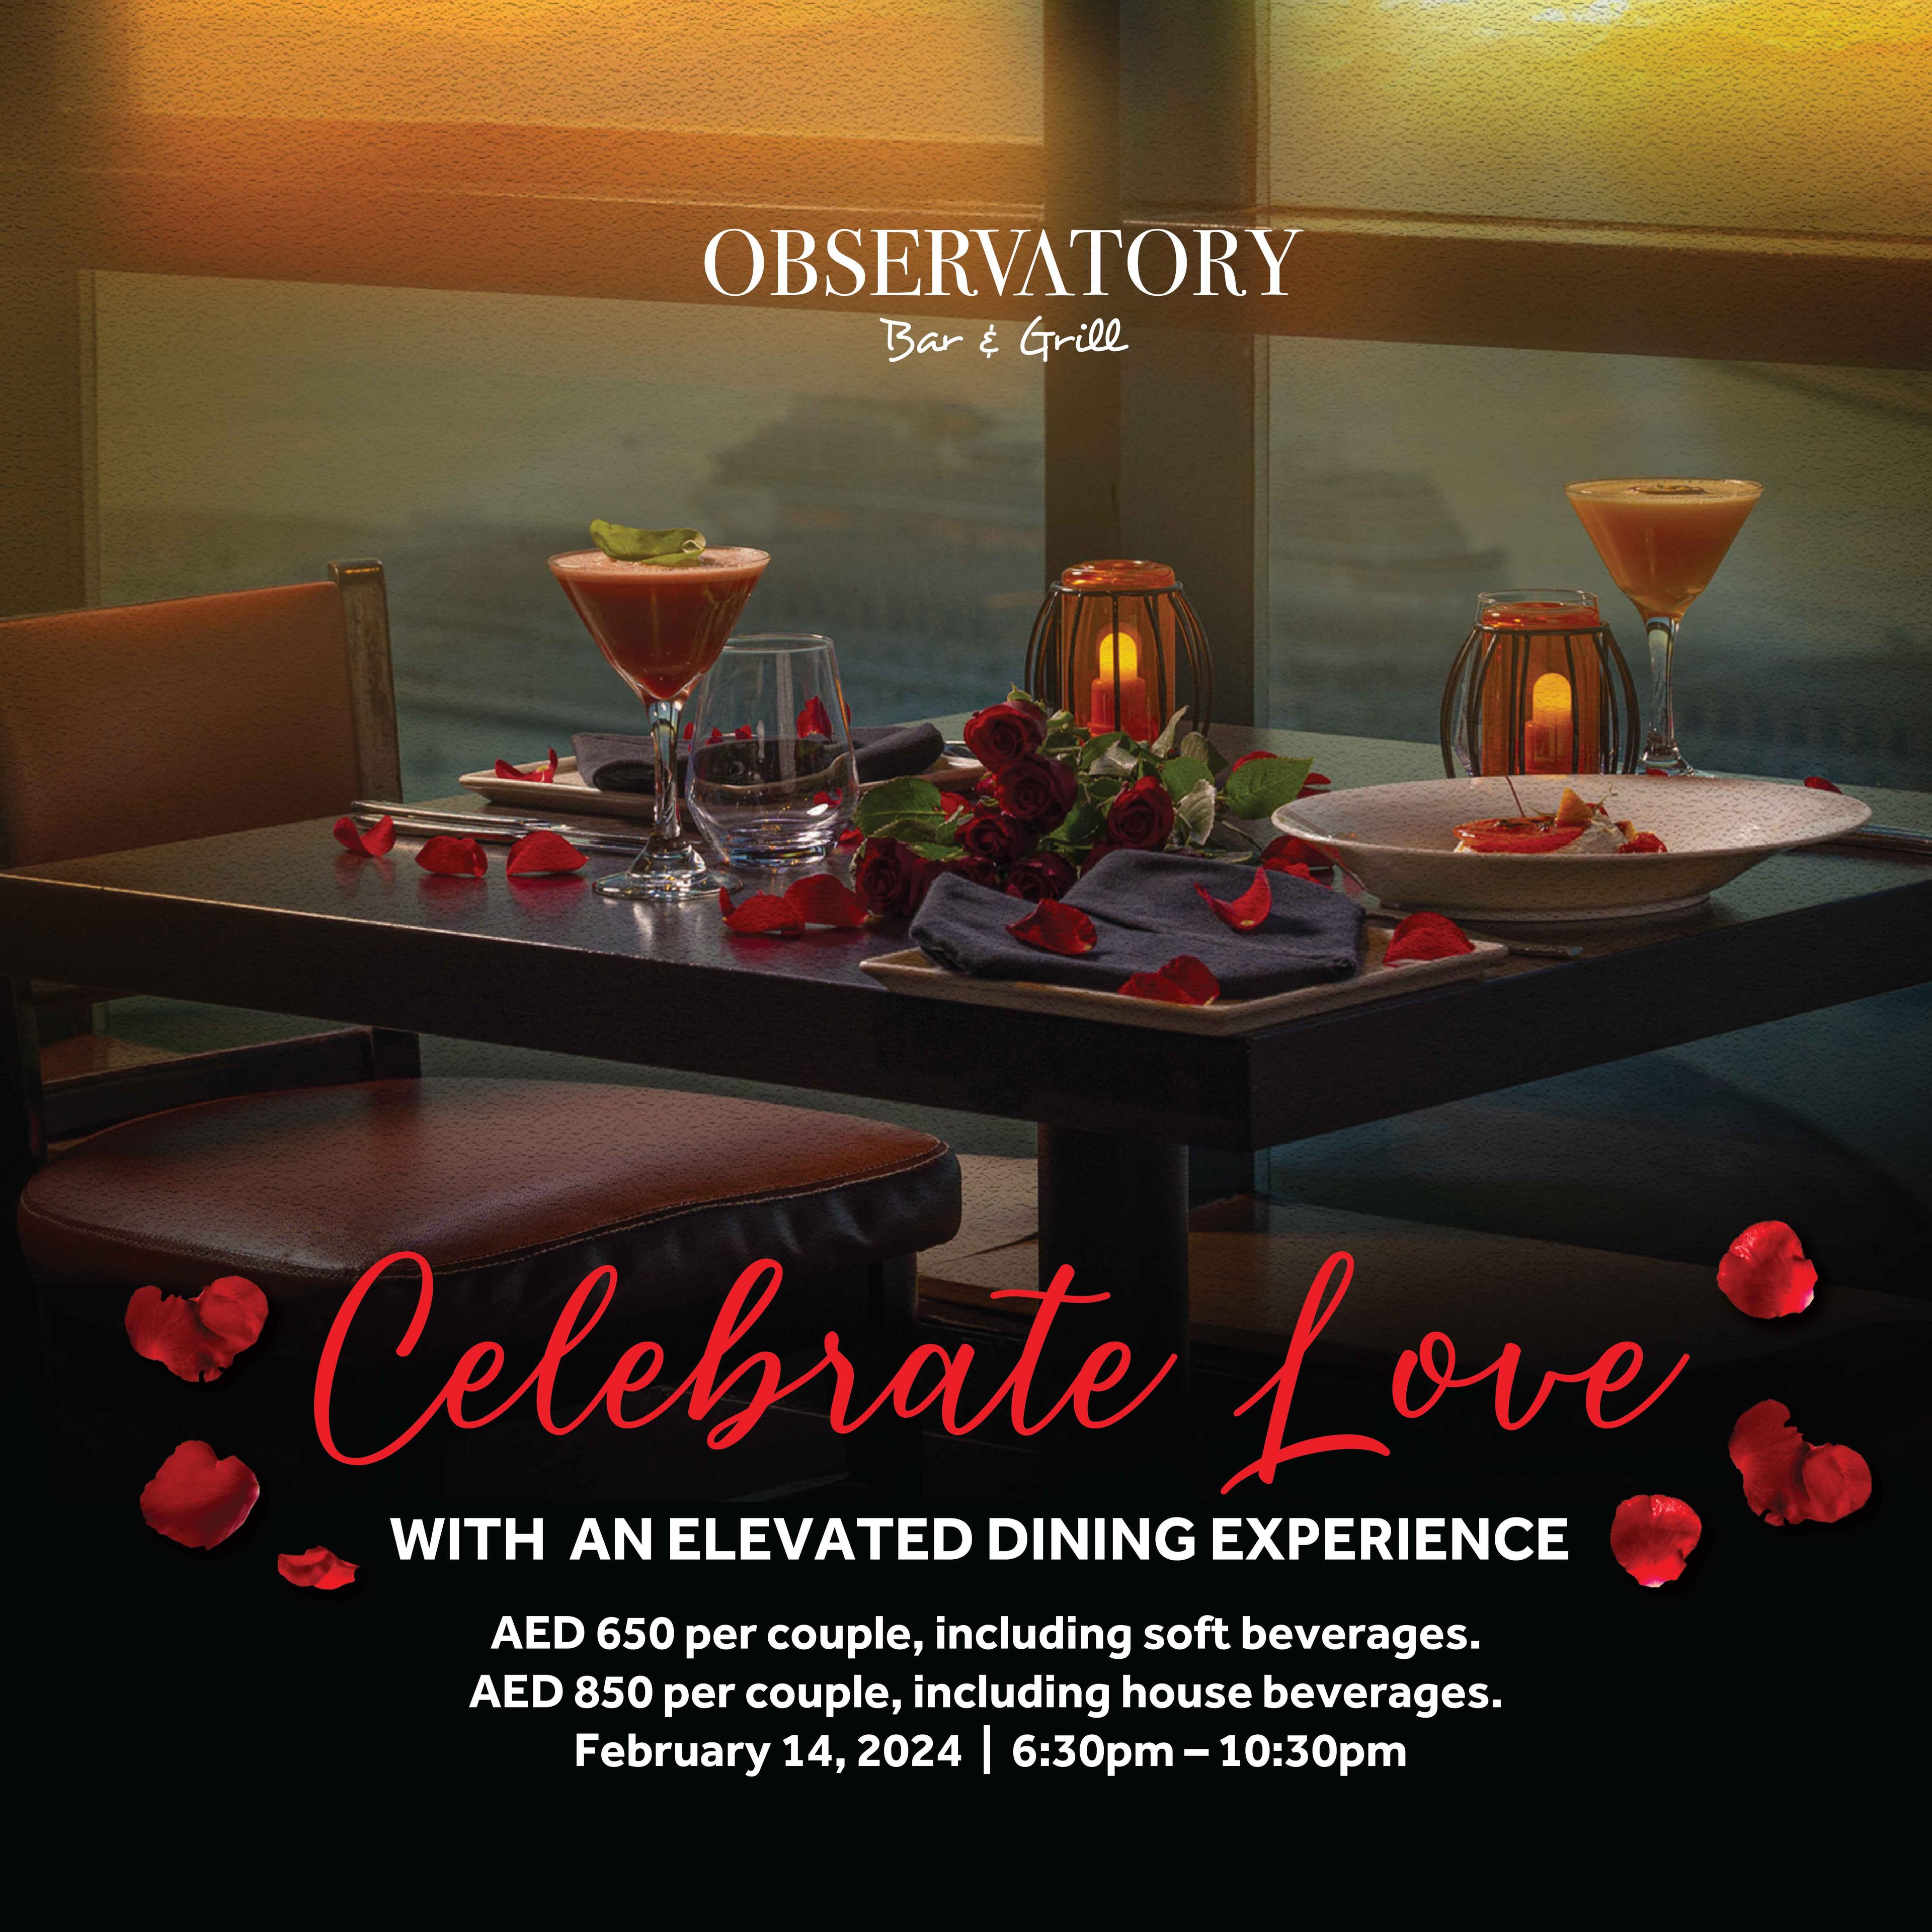  Celebrate love with an elevated dining experience